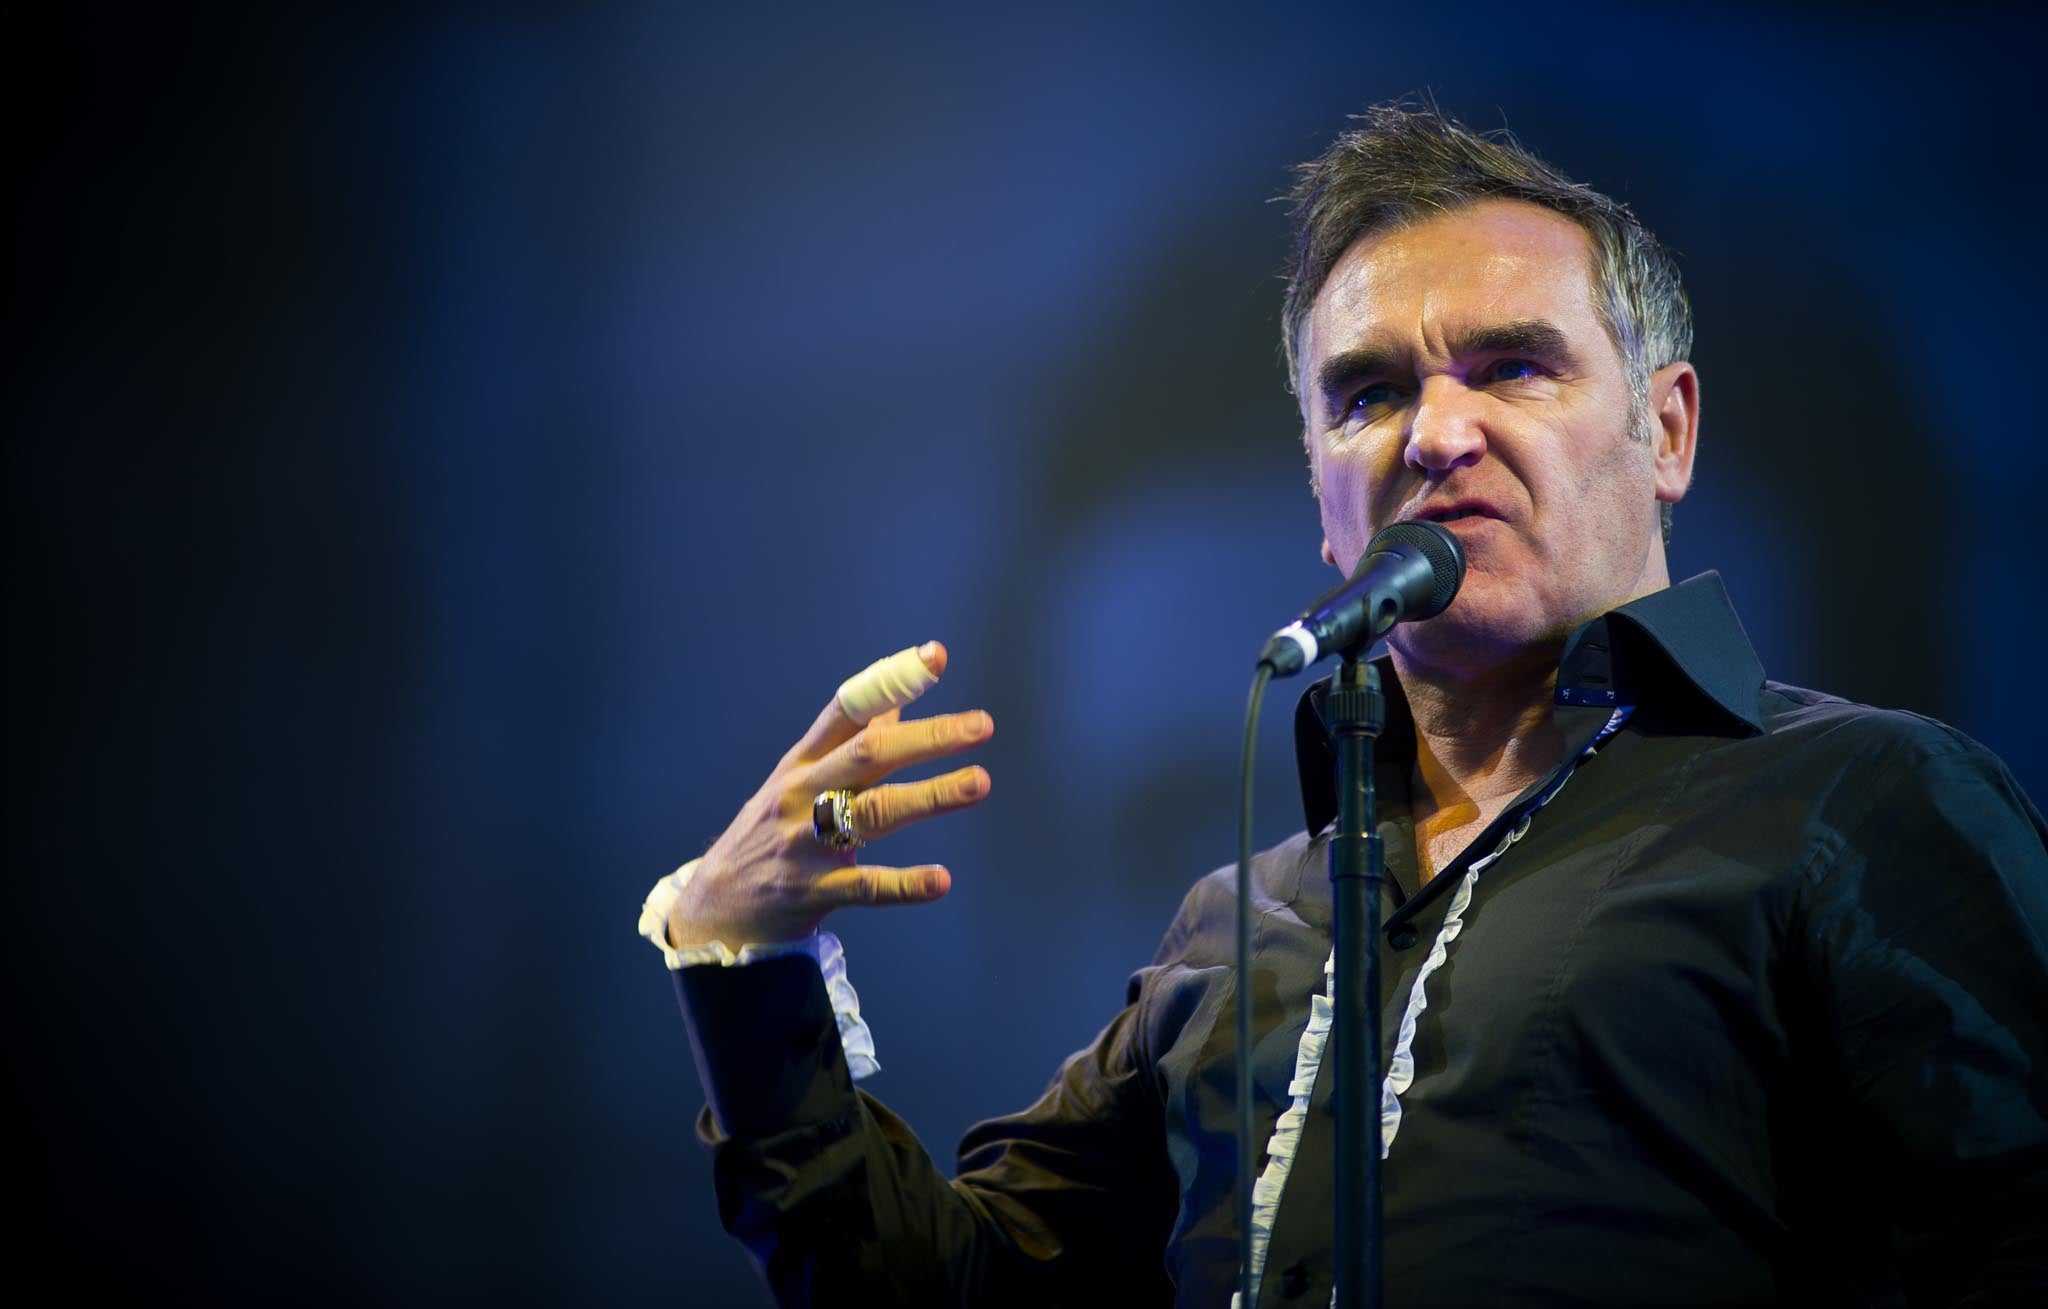 Morrissey has pulled his autobiography